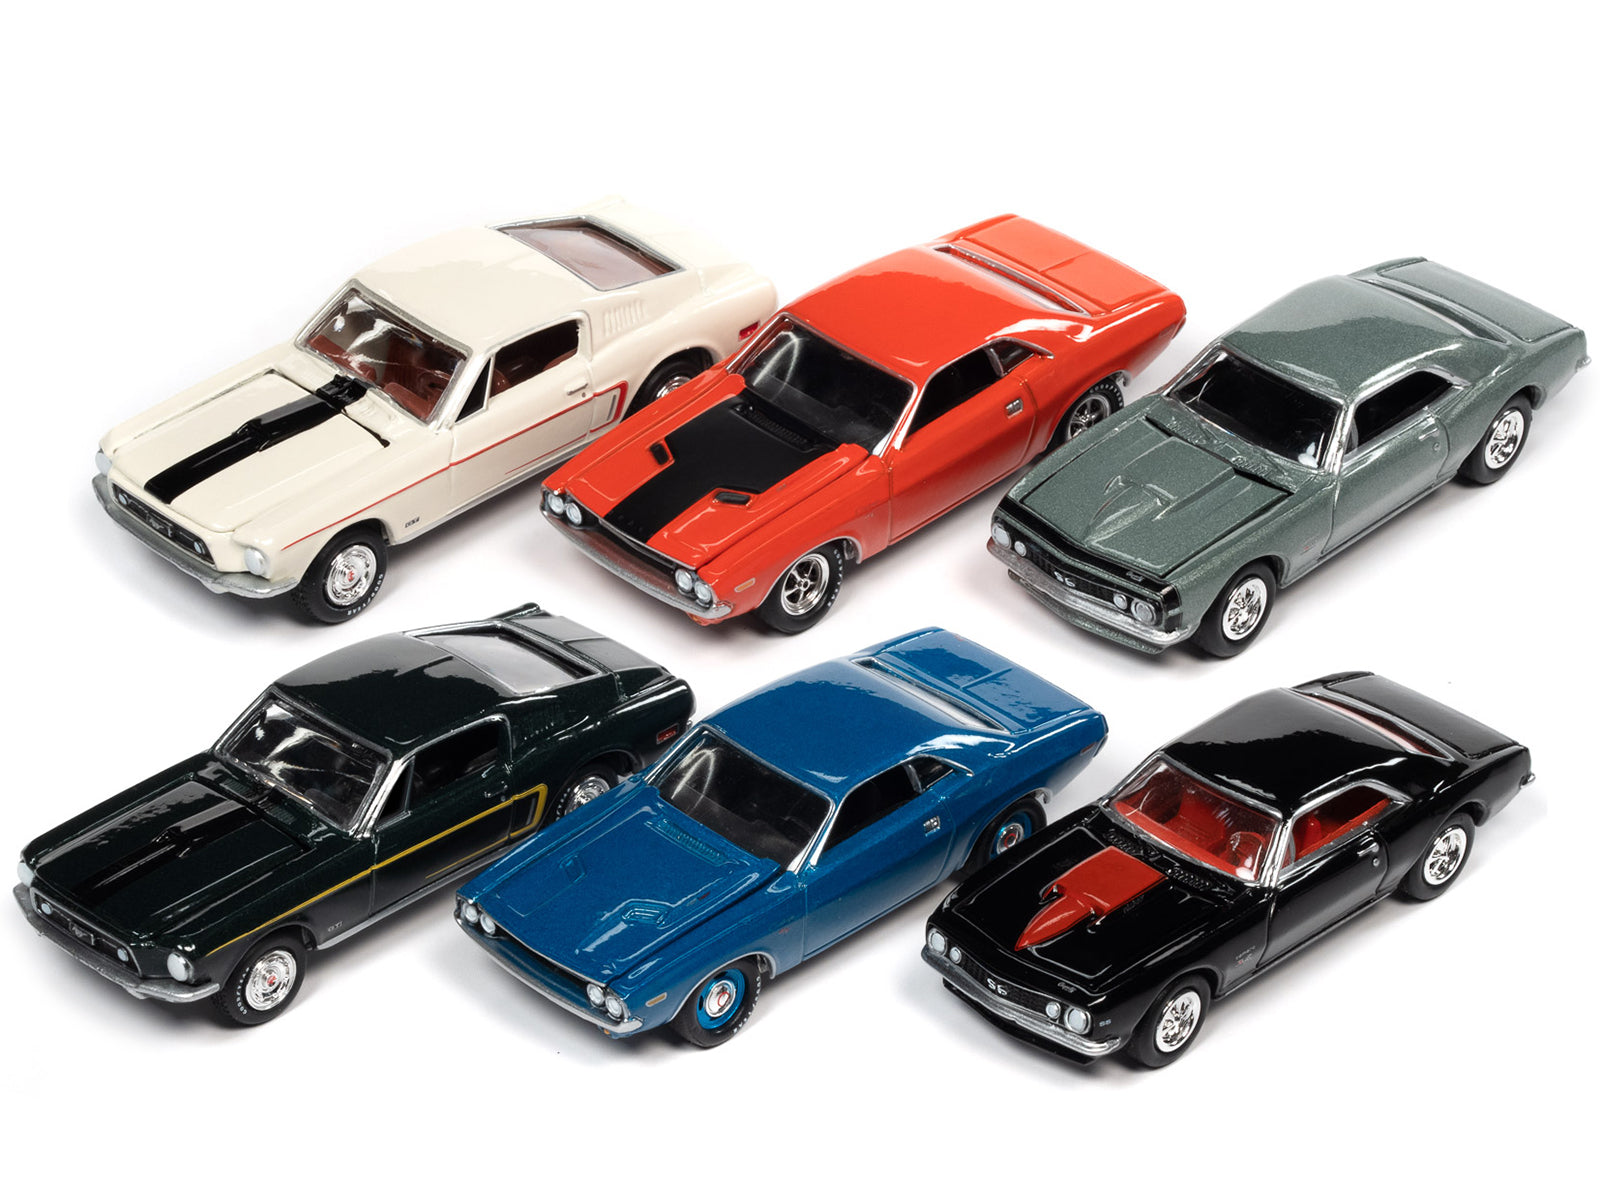 Johnny Lightning Collector's Tin 2021 Set of 6 Cars Release 3 Limited Edition of 7140 pieces Worldwide 1/64 Diecast Model Cars by Johnny Lightning